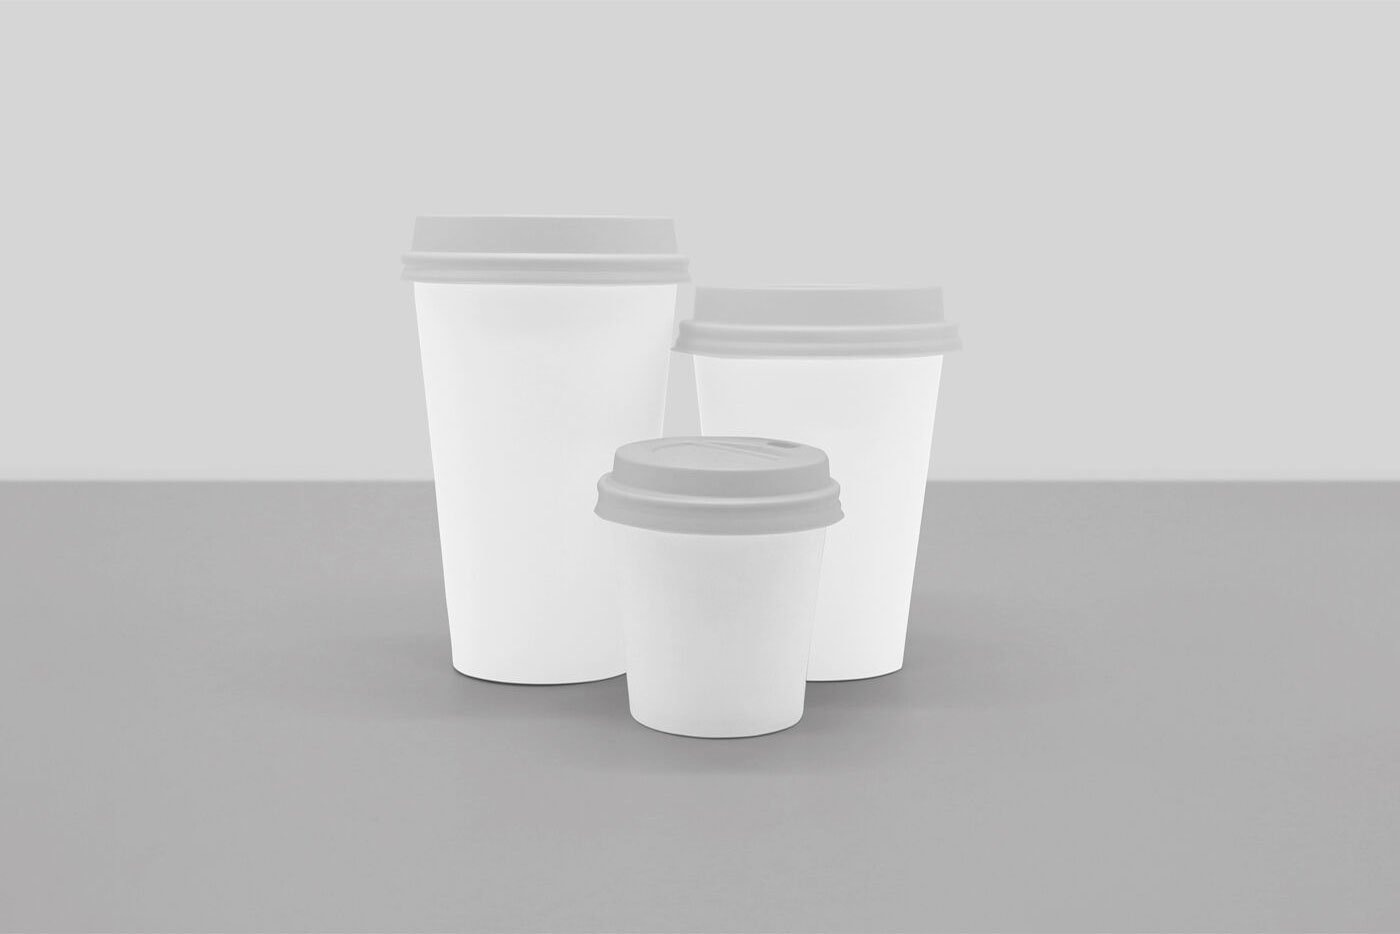 Mockup Showing Three Coffee Cups in Three Different Sizes FREE PSD